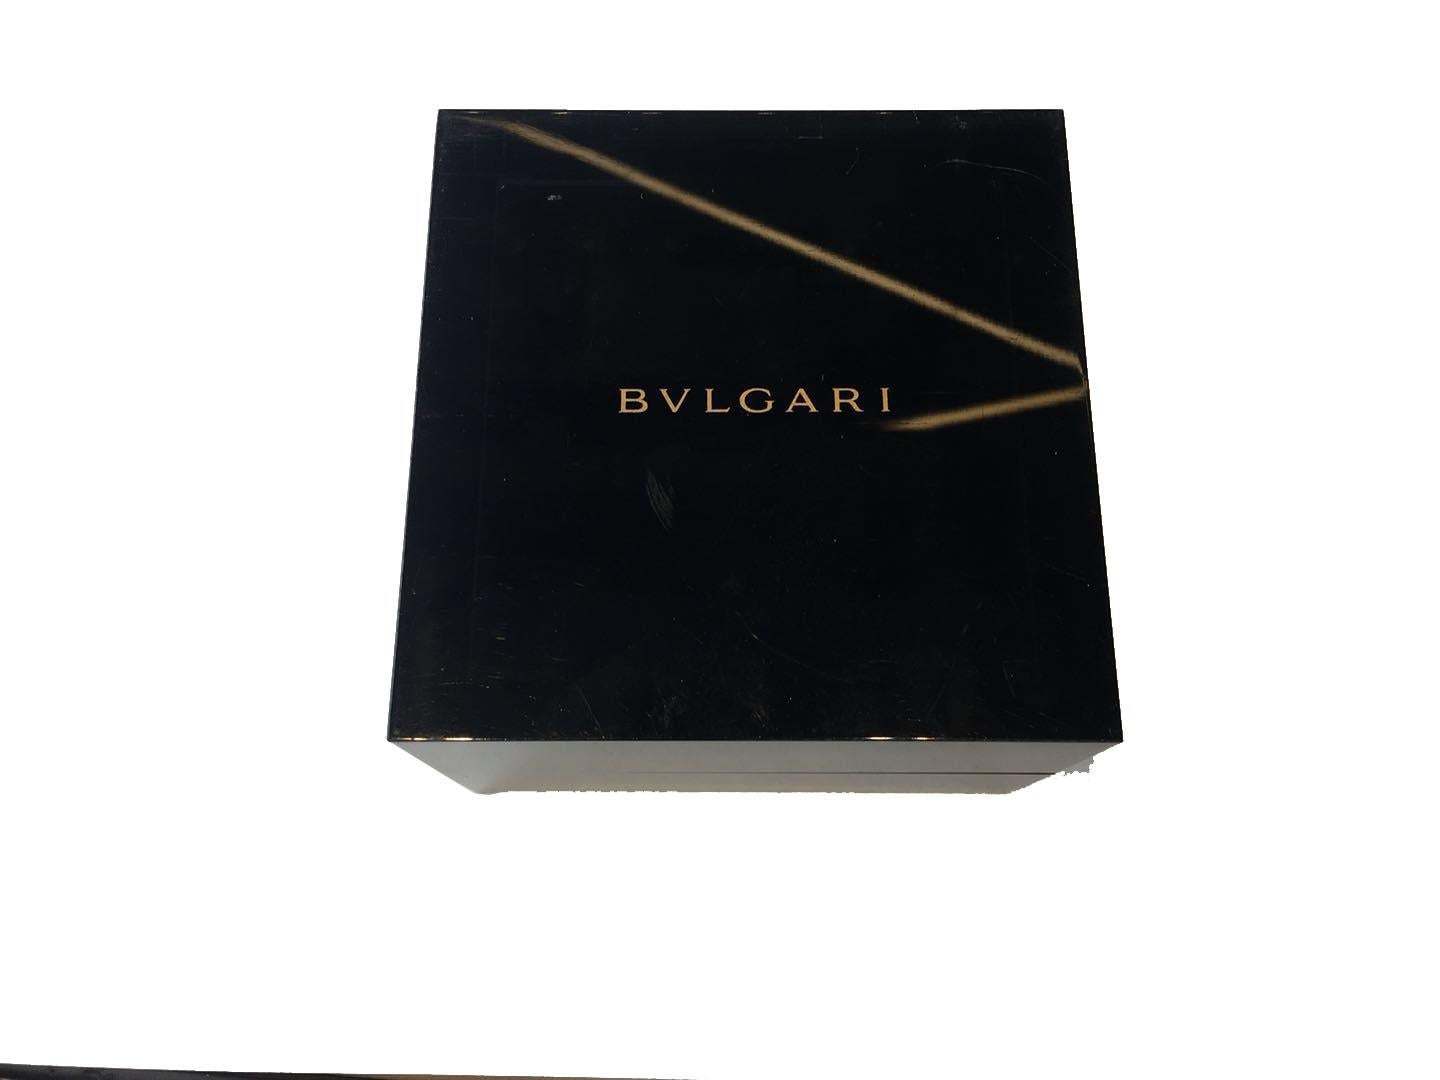 Bvlgari Serpenti Bracelet In Excellent Condition For Sale In New York, NY